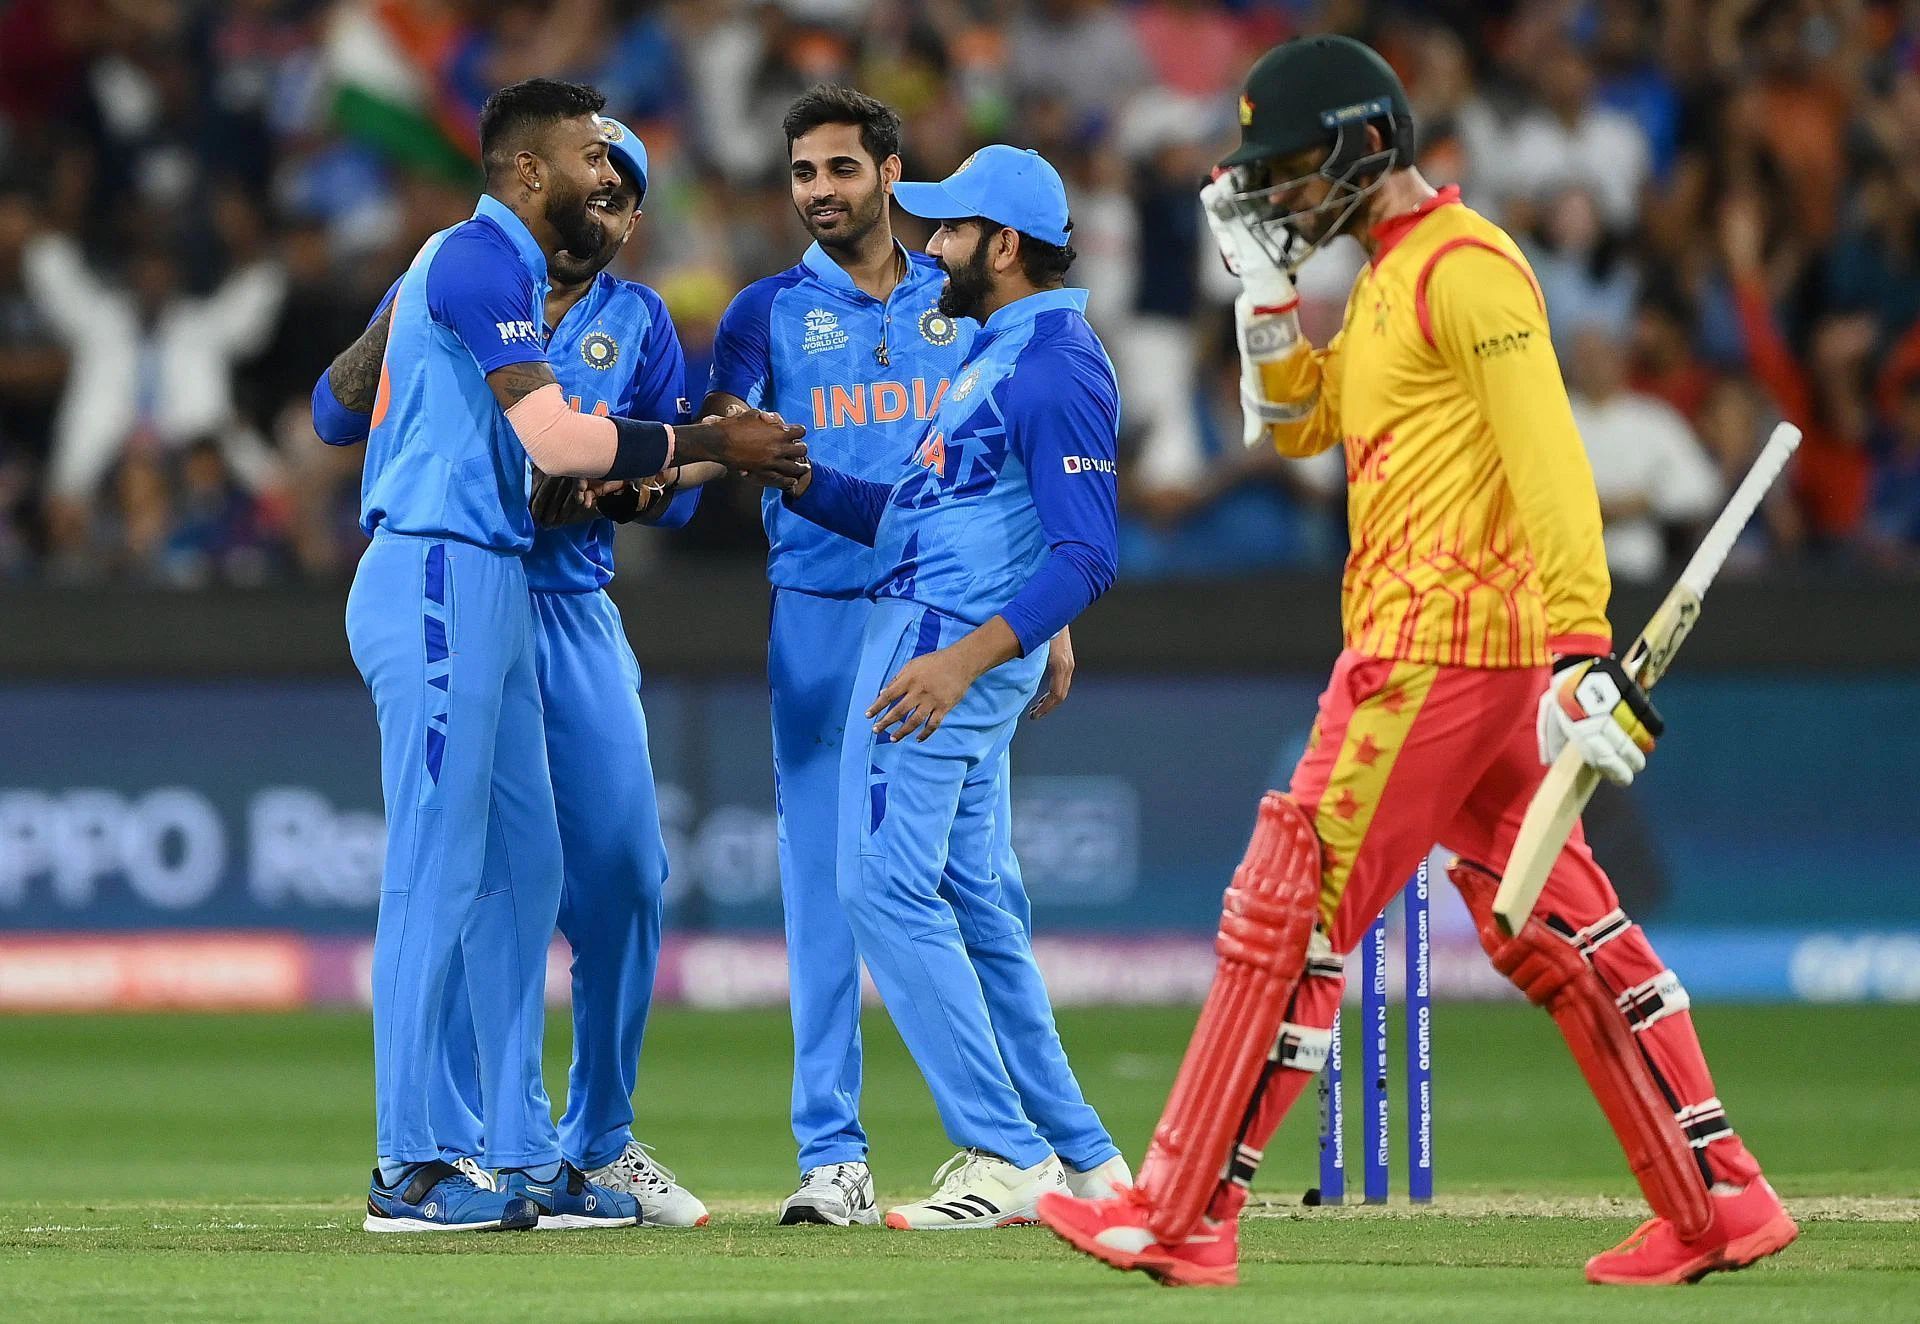 Defending a total of 186, all the Indian bowlers chipped in as Zimbabwe were bundled out for 115. Ashwin claimed three, while Pandya and Shami helped themselves to two apiece. Pic: Getty Images